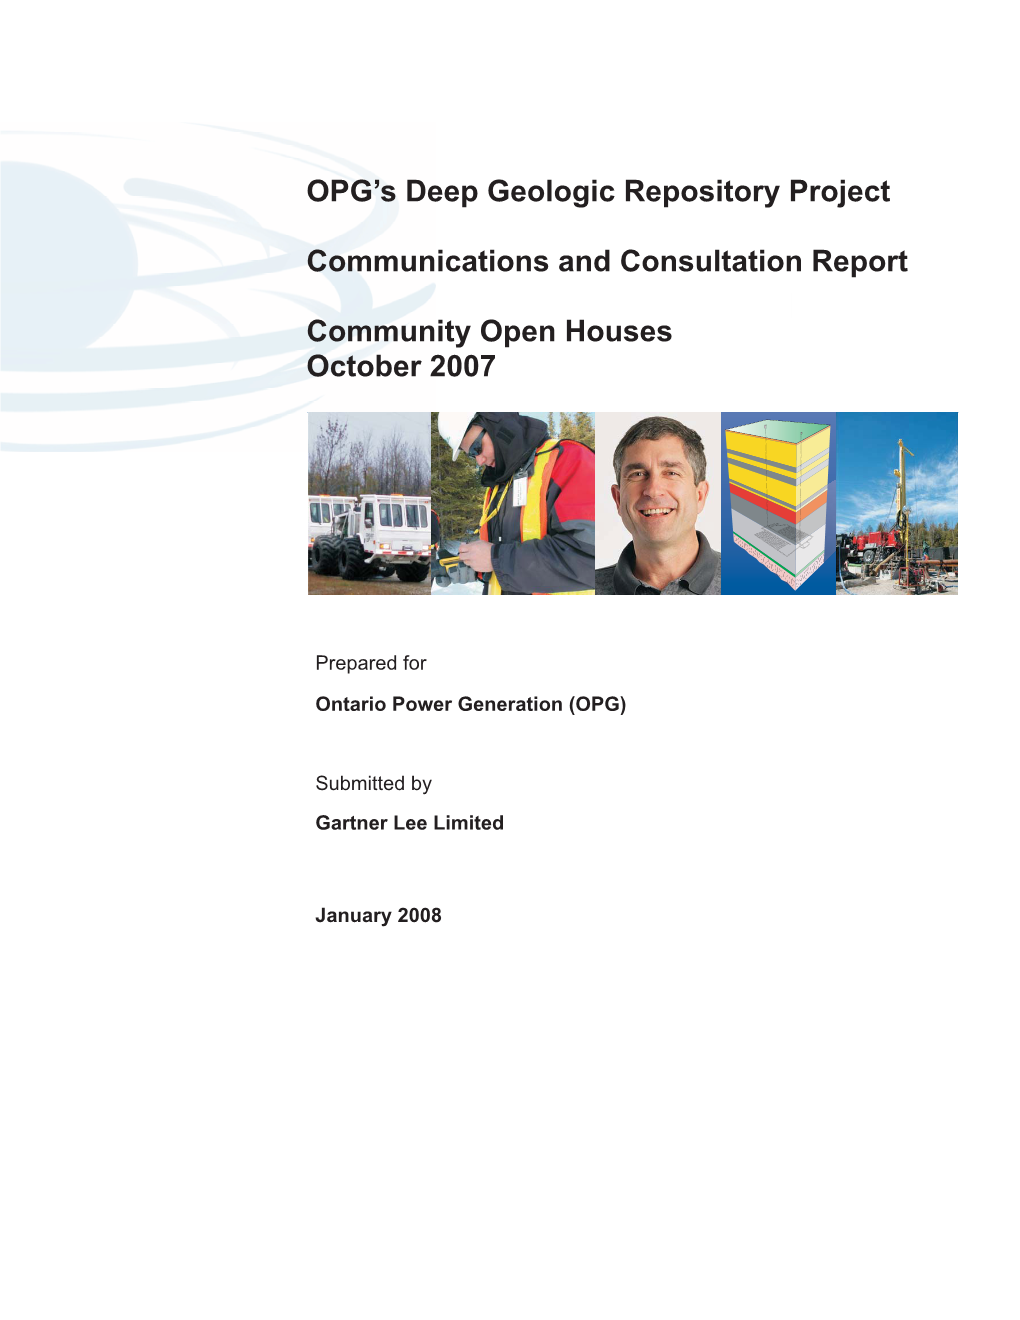 OPG's Deep Geologic Repository Project Communications and Consultation Report Community Open Houses October 2007